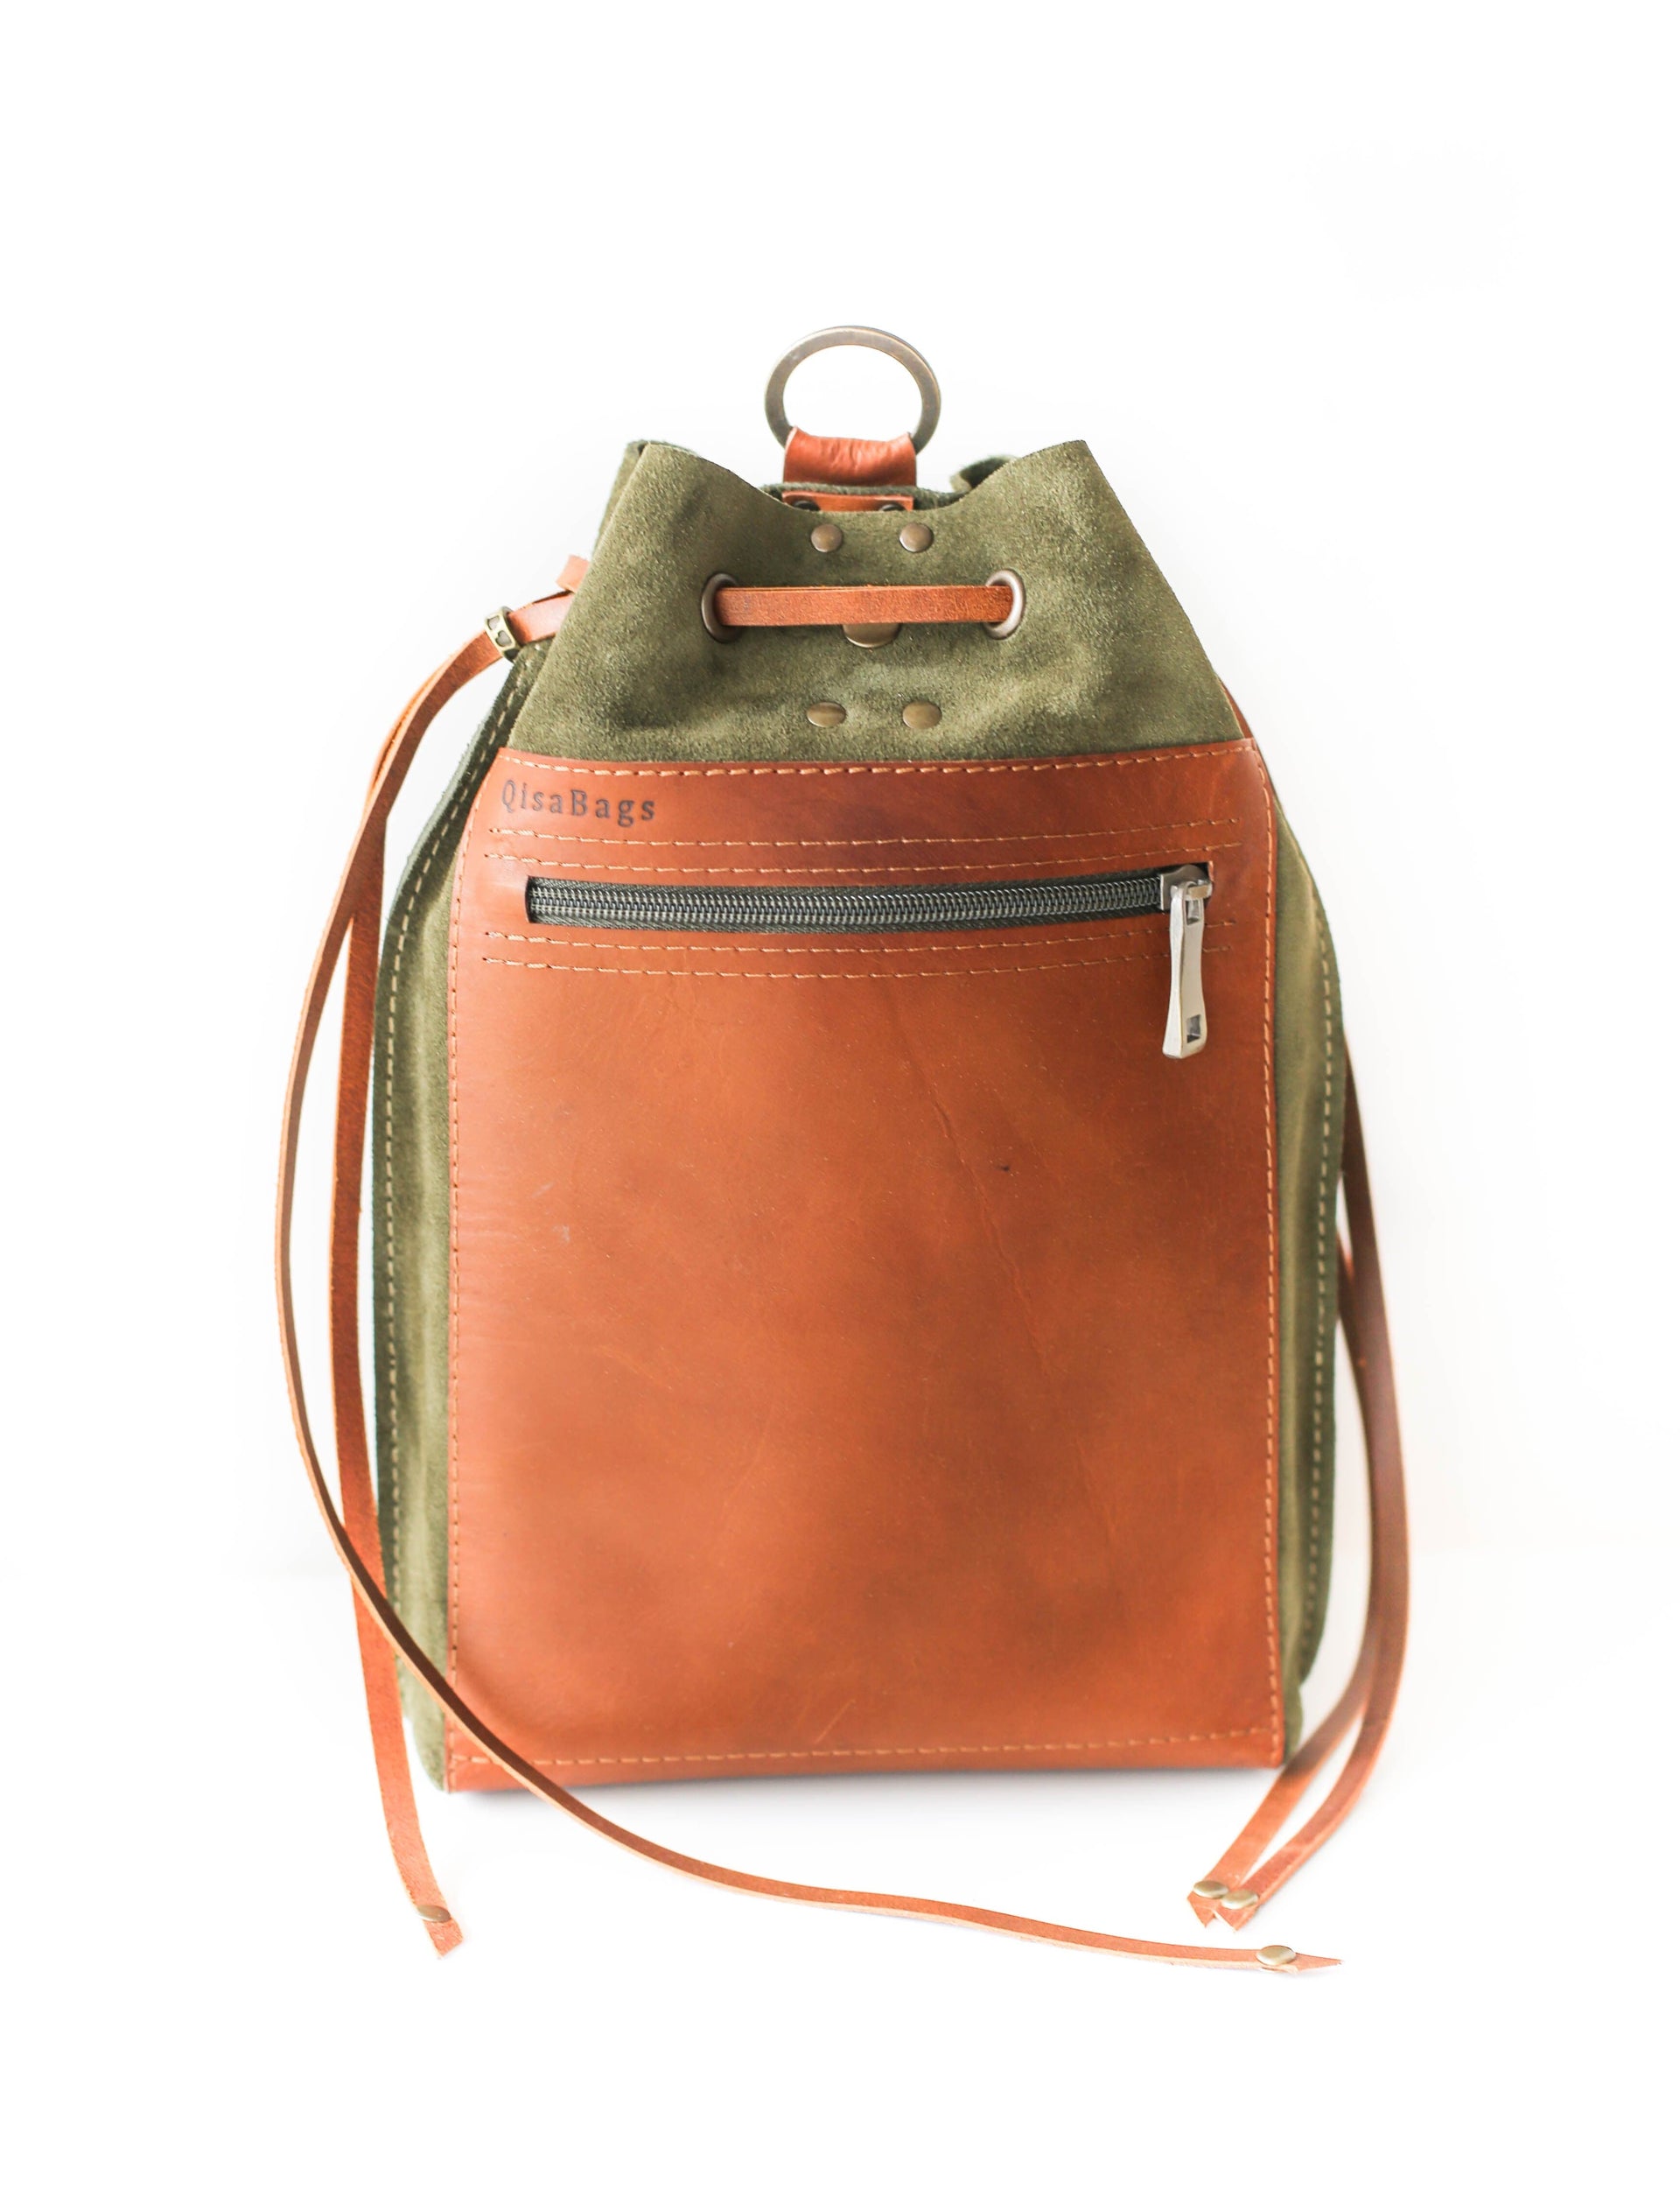  leather backpack purse for women